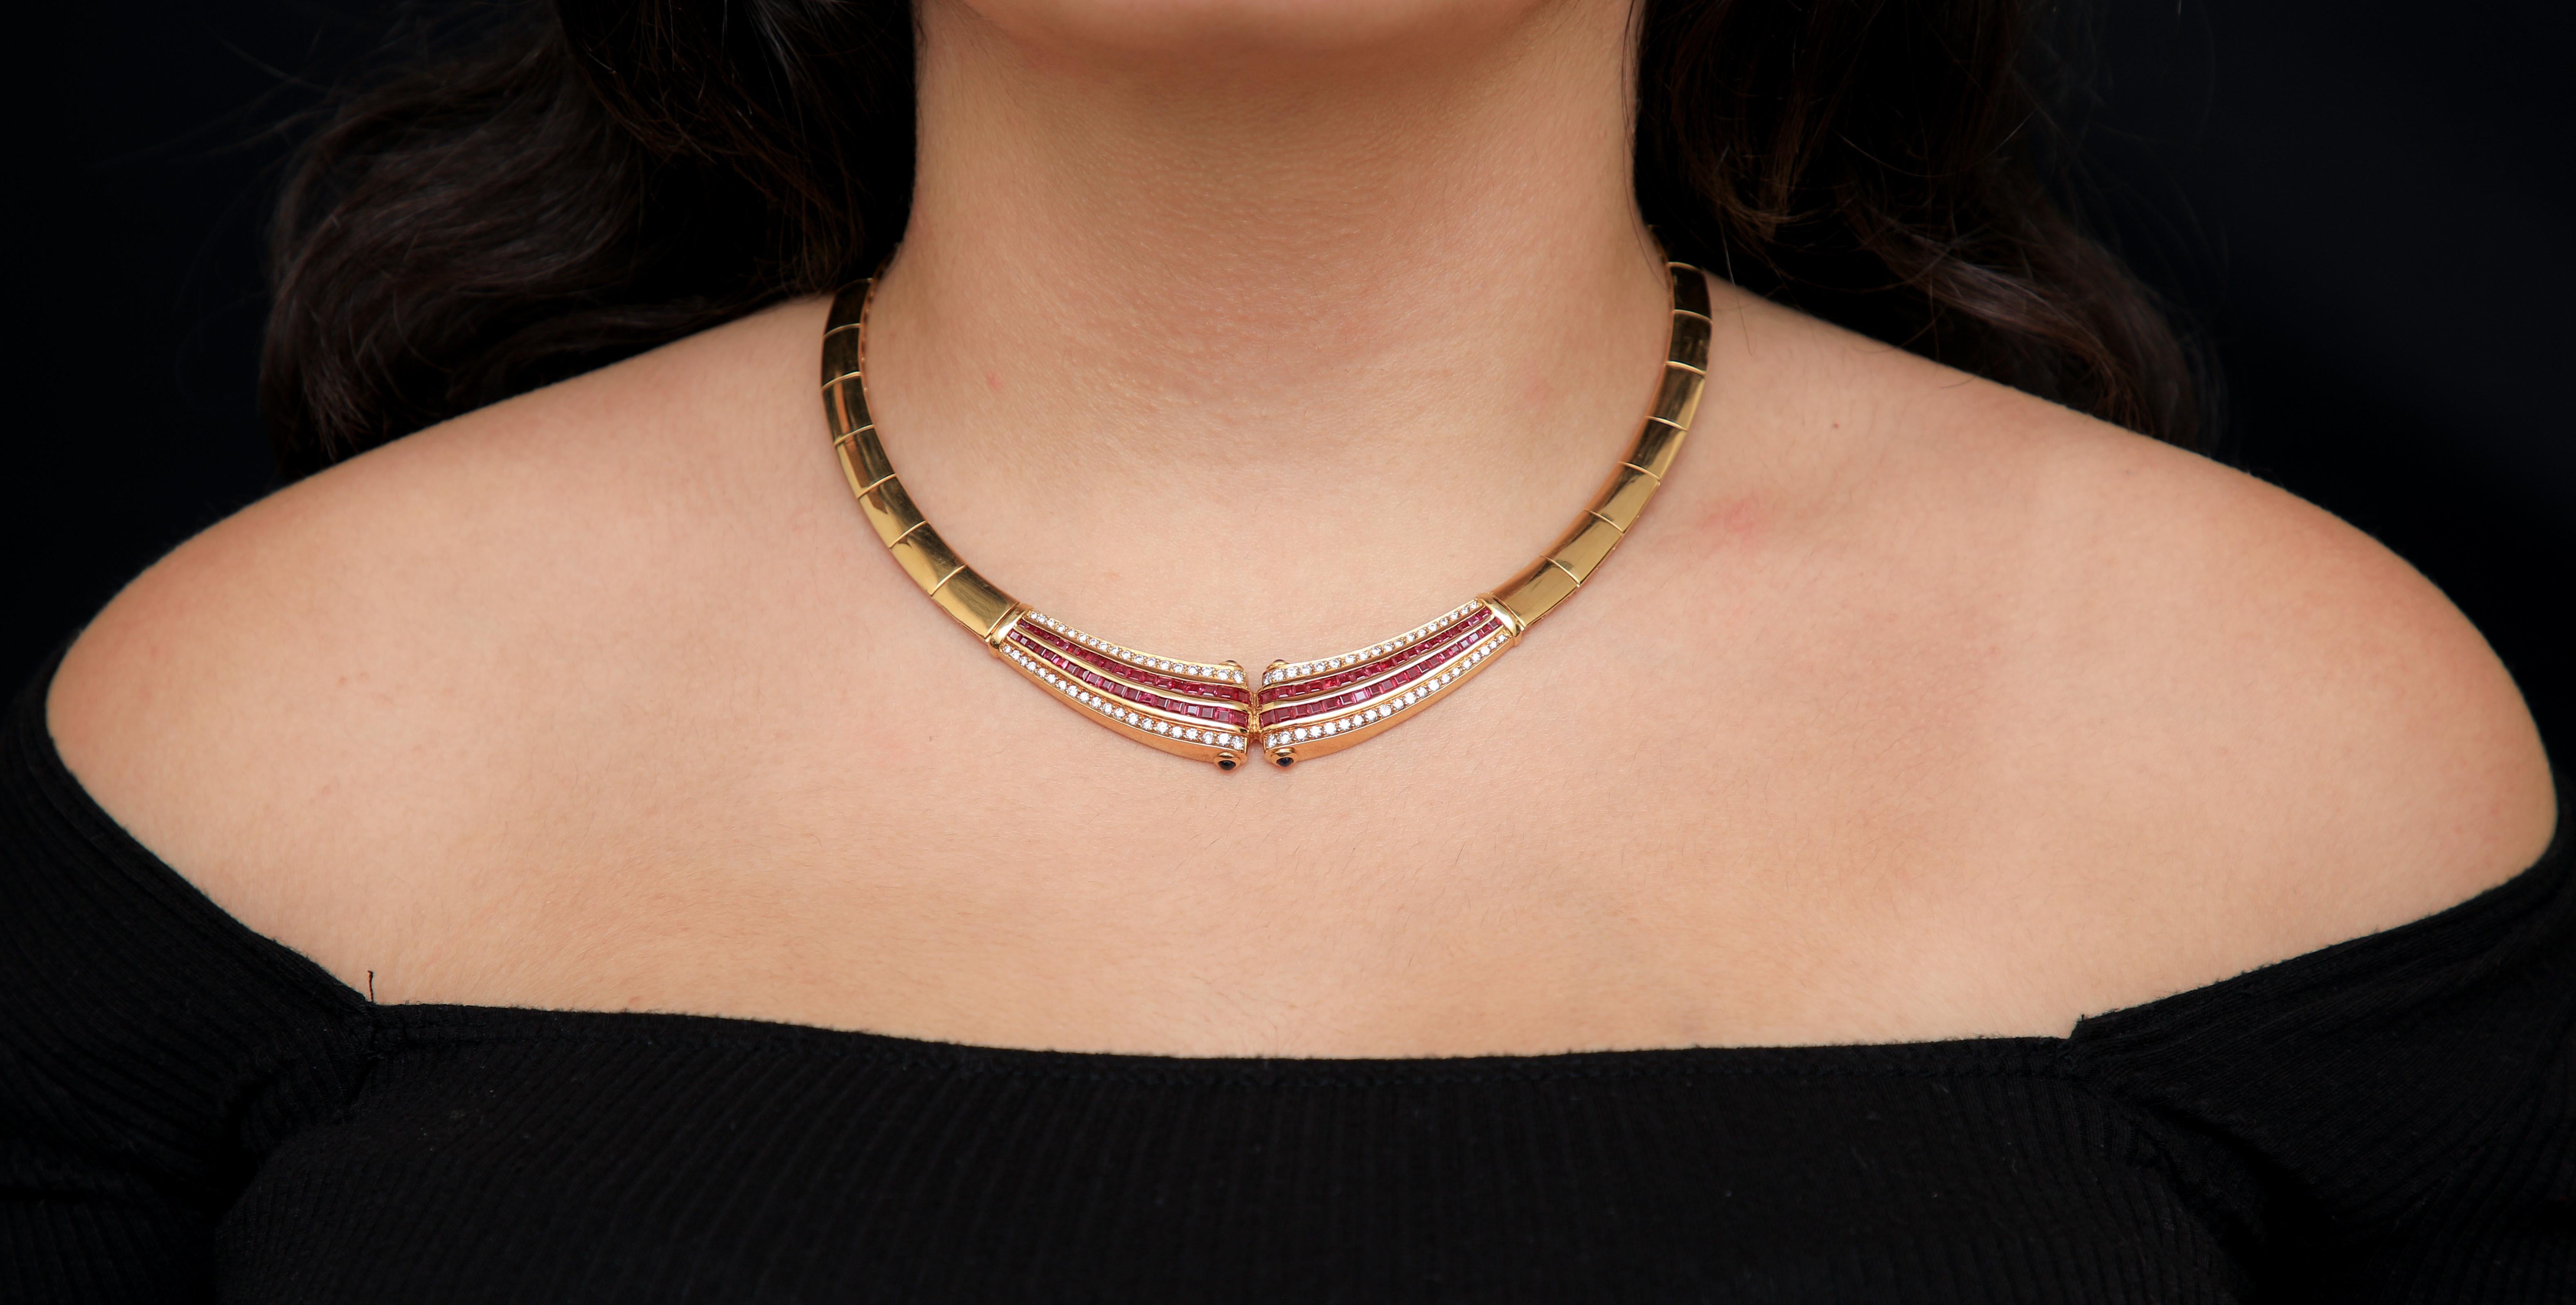 Stunning Omega 18k Ruby Channel Set Diamond Necklace.

Immaculate and very pristine 18k, solid polished necklace to complete the sophisticated and charming look. This beautiful color fills the room with life. The necklace has a solid weight of 70. 9